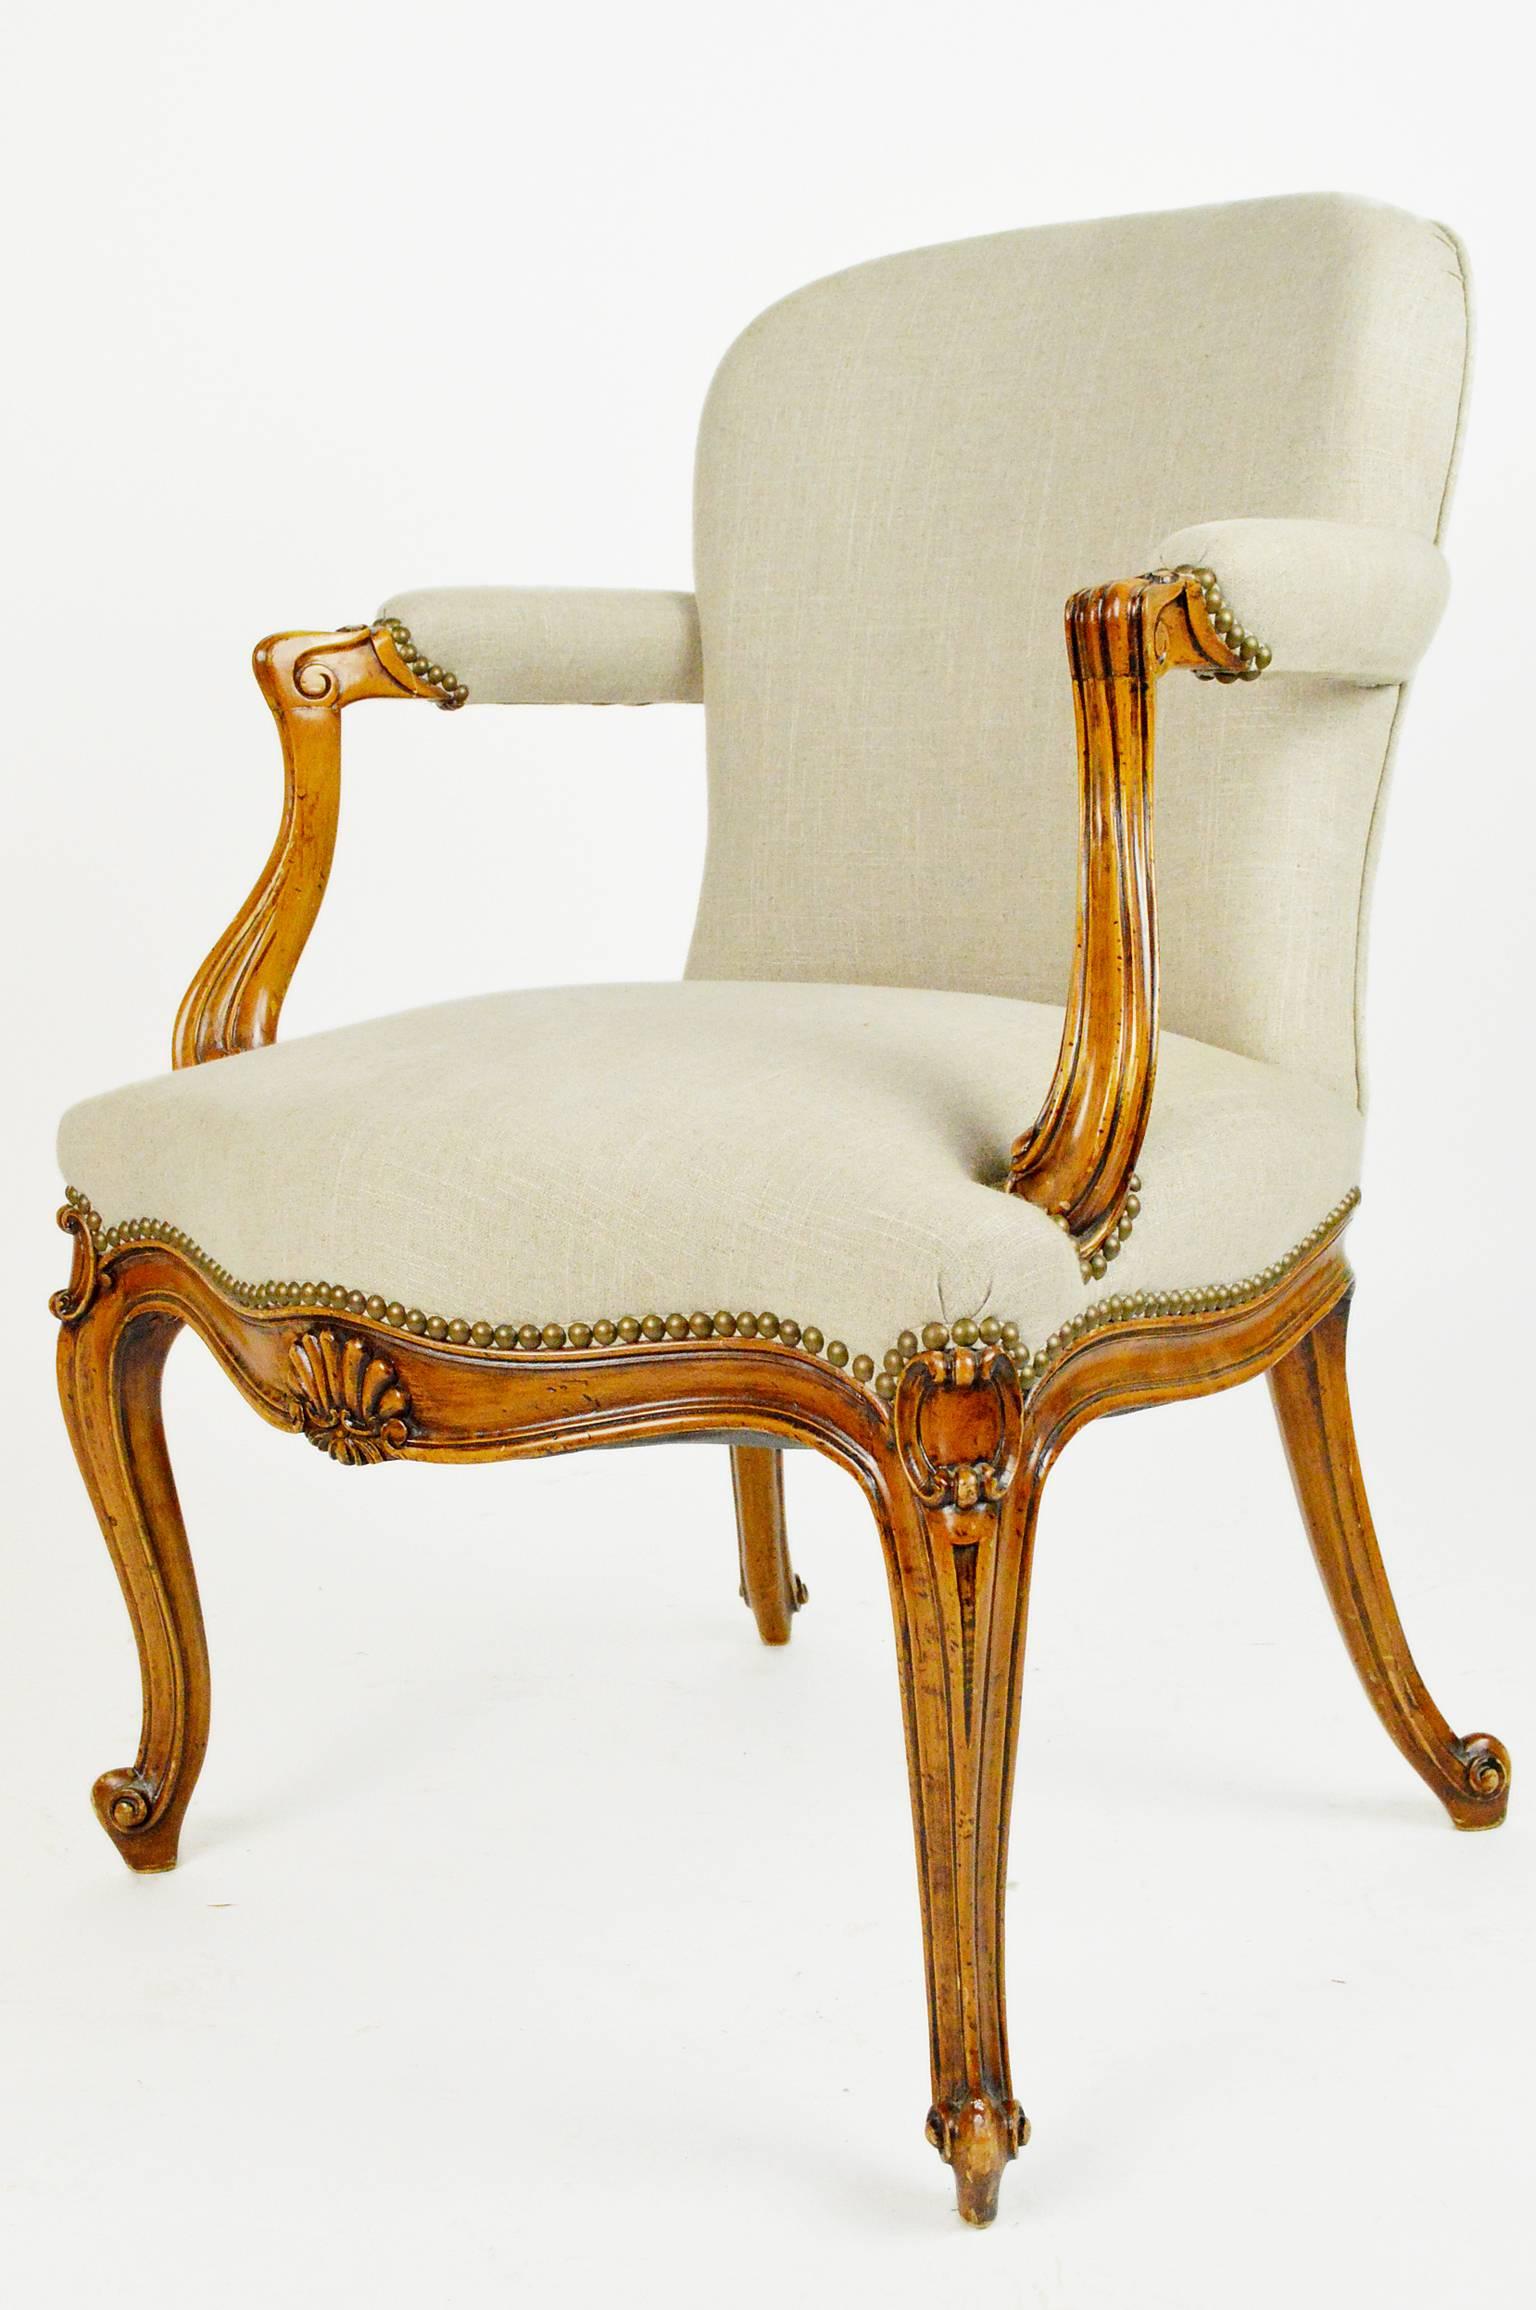 Late 19th century French Regency style carved wood open armchair.
Measures: 28.25